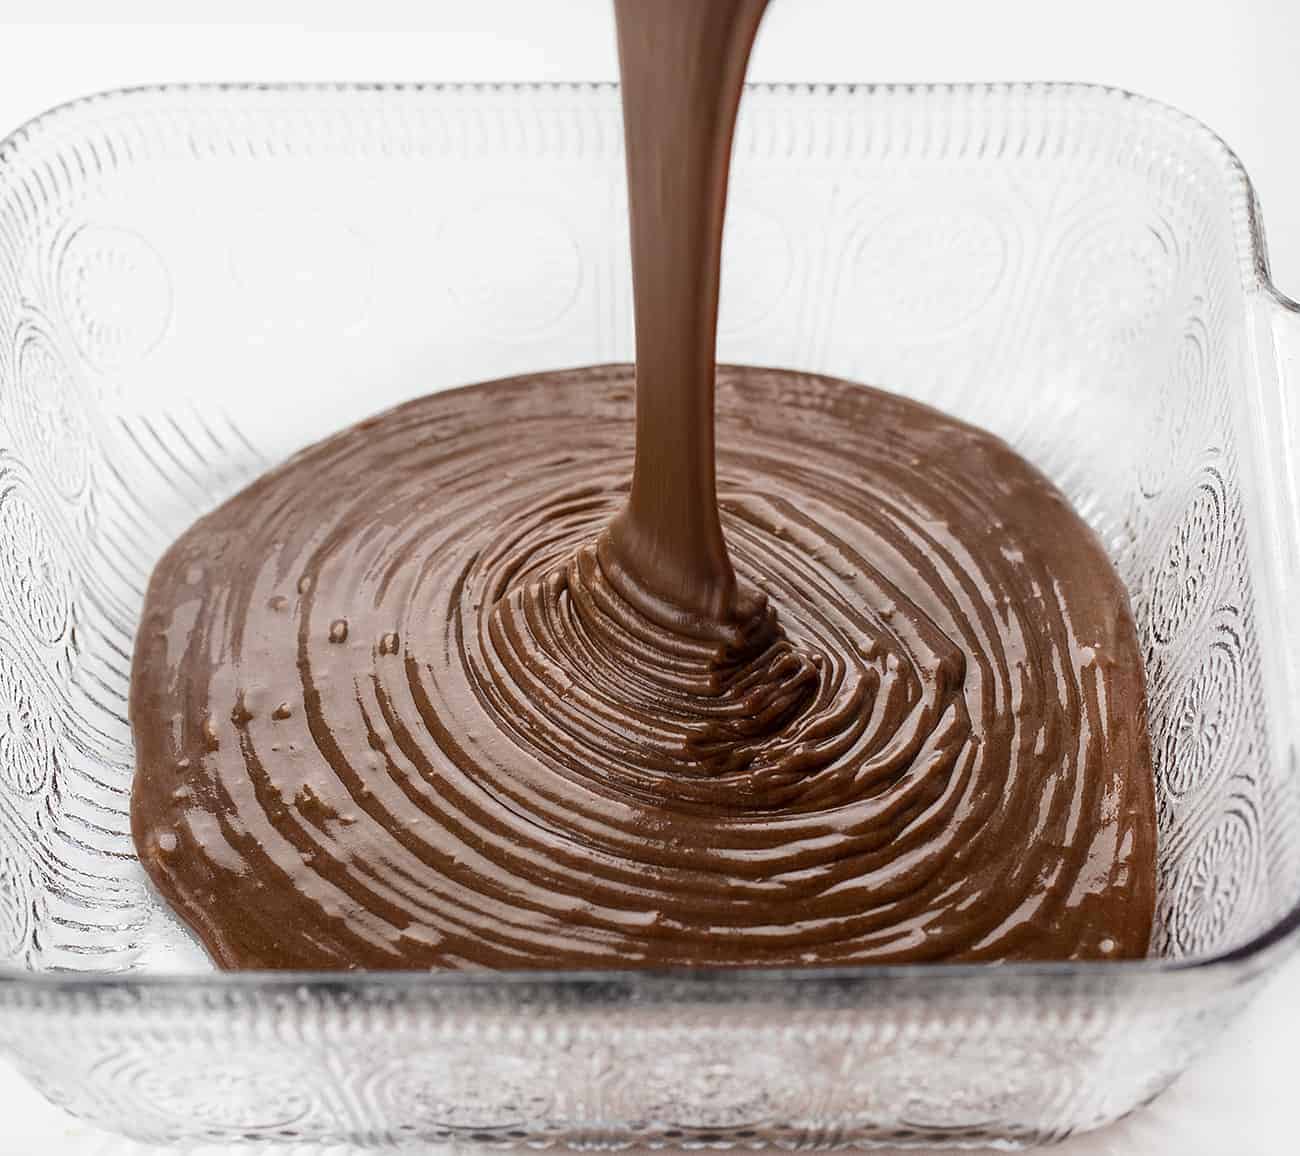 Pouring Chocolate Depression Cake Batter into Pan